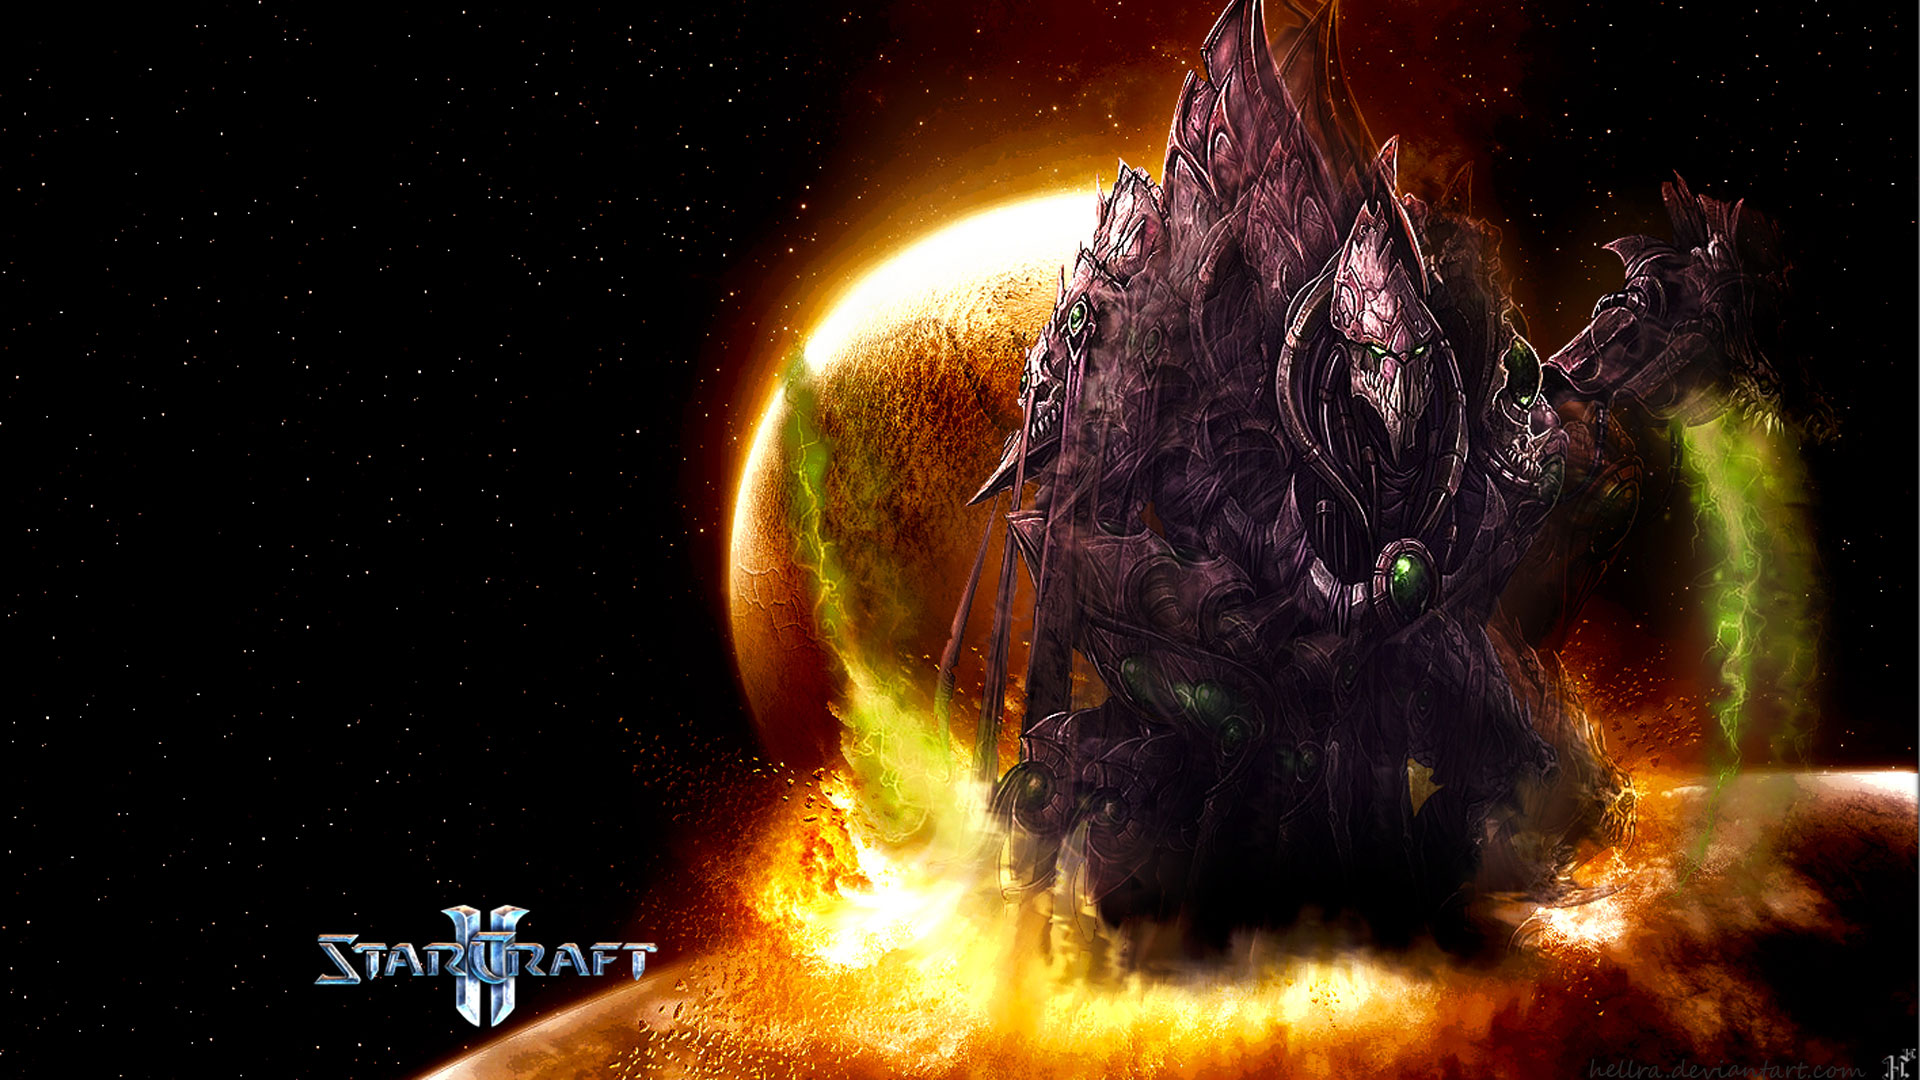 High Resolution Game Starcraft 2 Zerg Wallpapers HD 6 Full Size ...